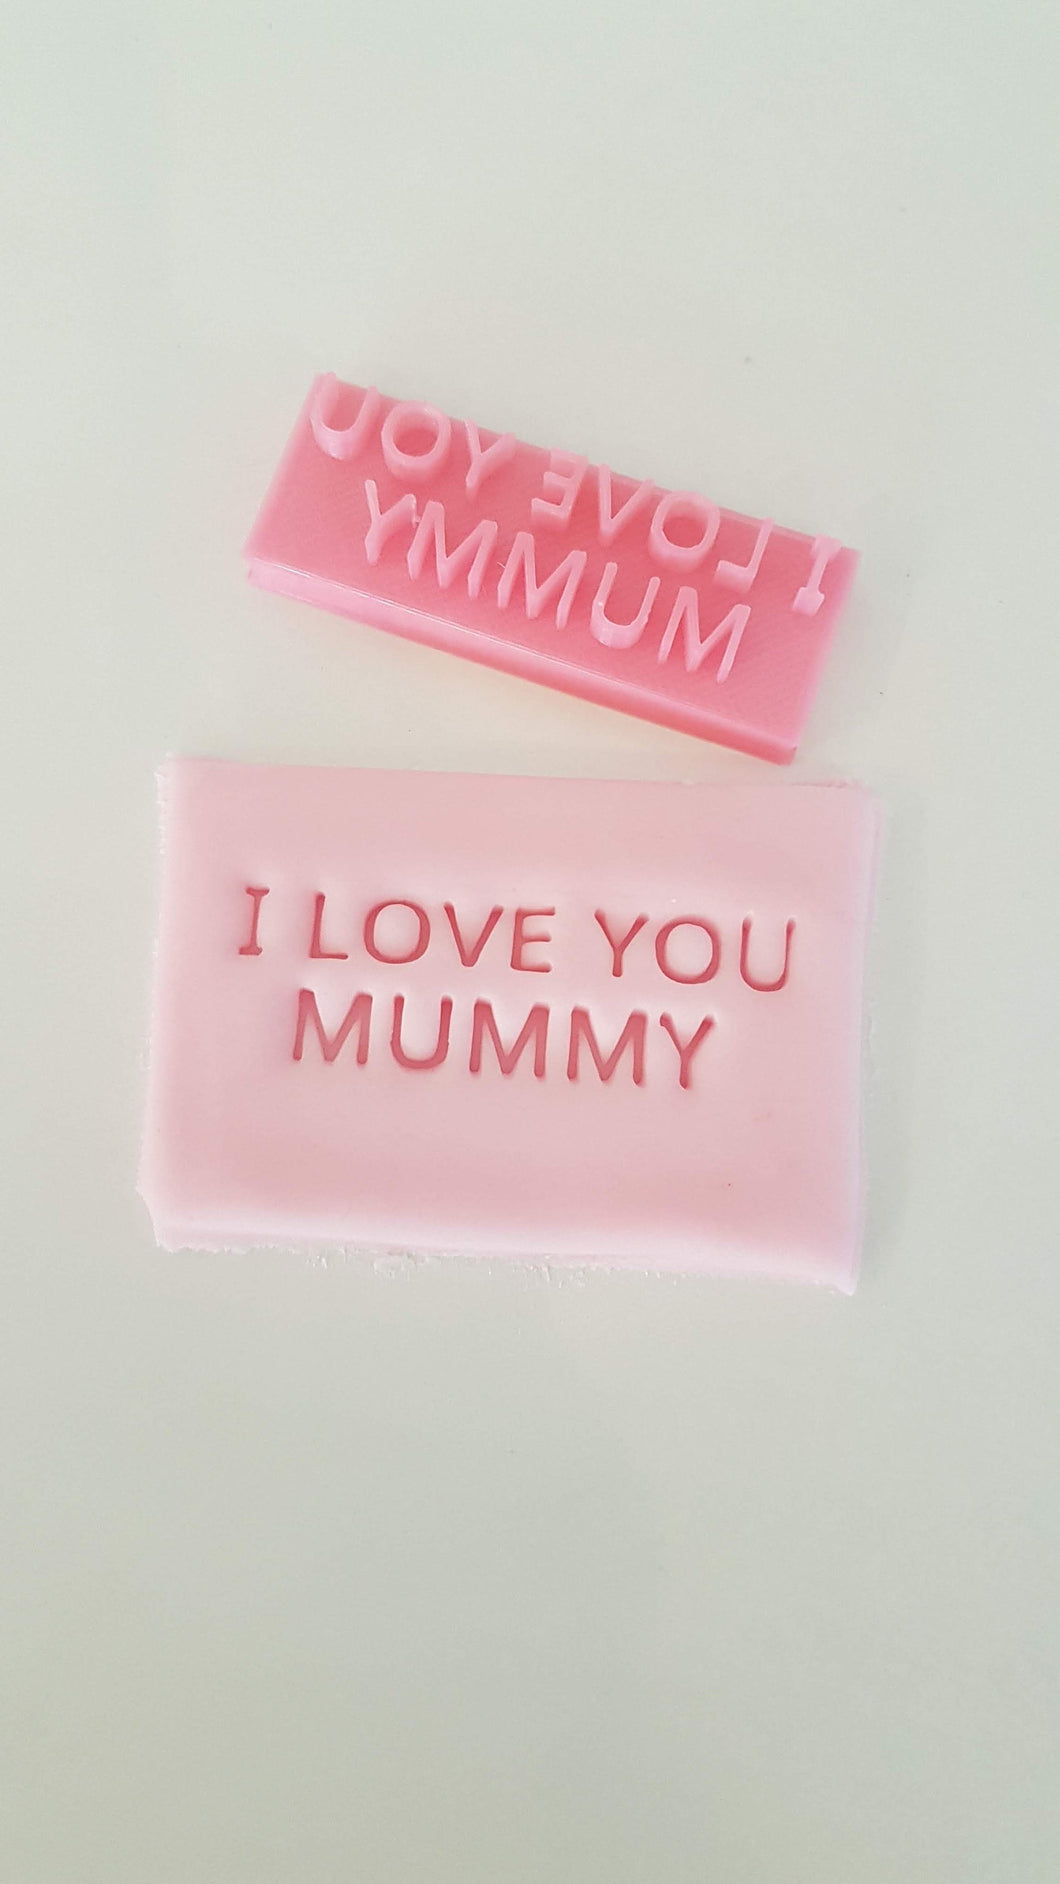 I Love You Mummy Stamp|Icing|Baking|Cookie Stamp|Mother's Day Gift|Birthday|Wife|Partner